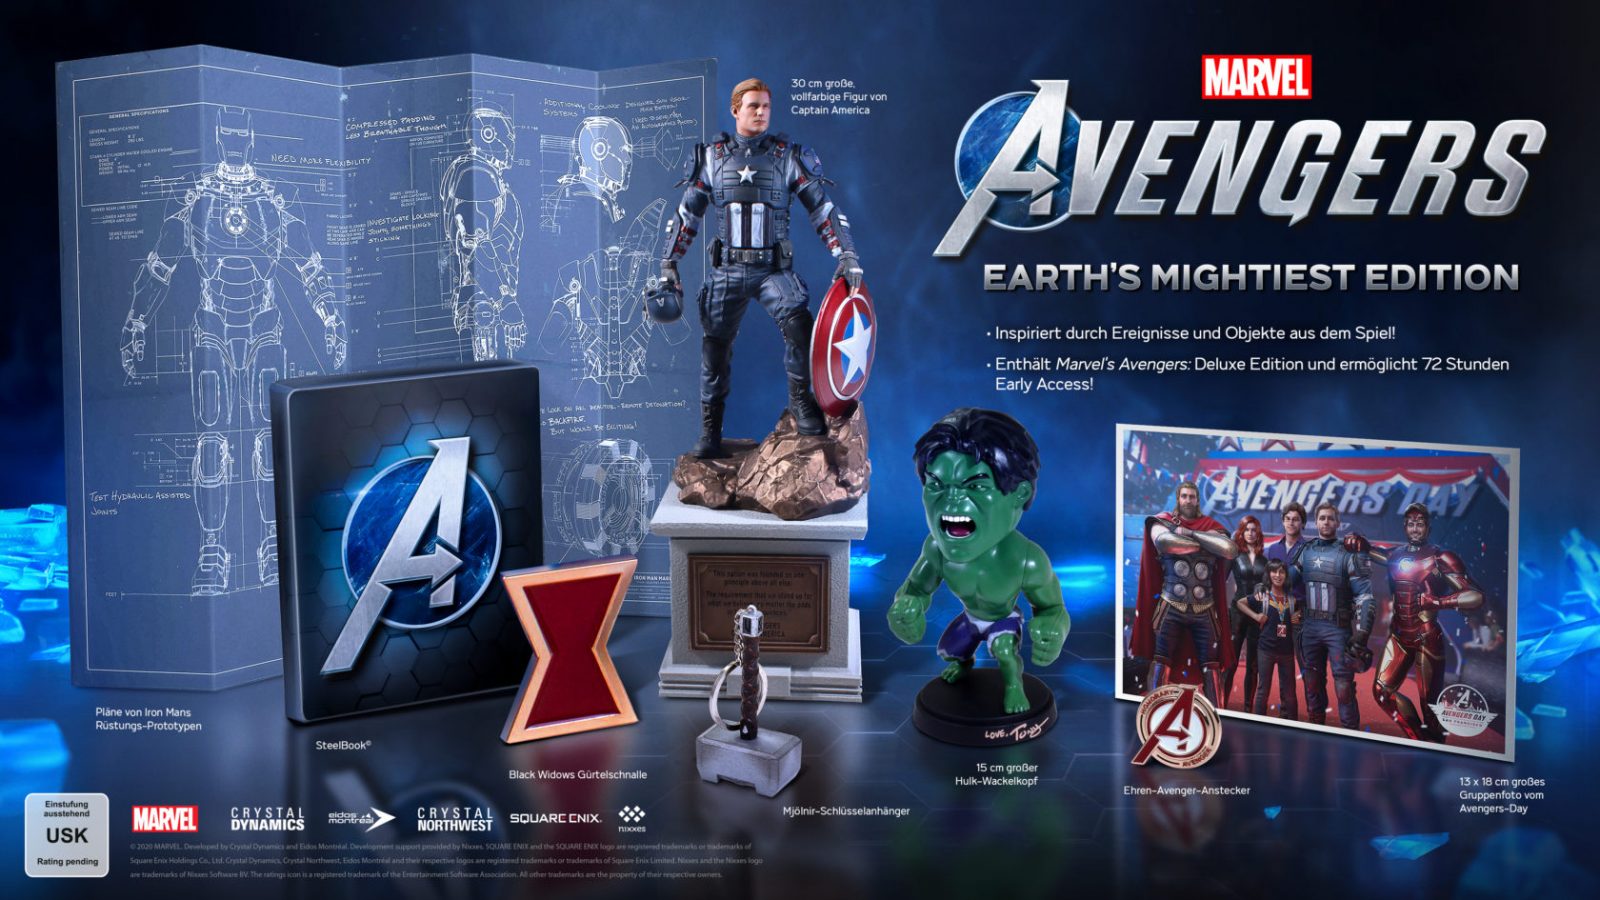 MARVEL'S AVENGERS: Earth's Mightiest Edition